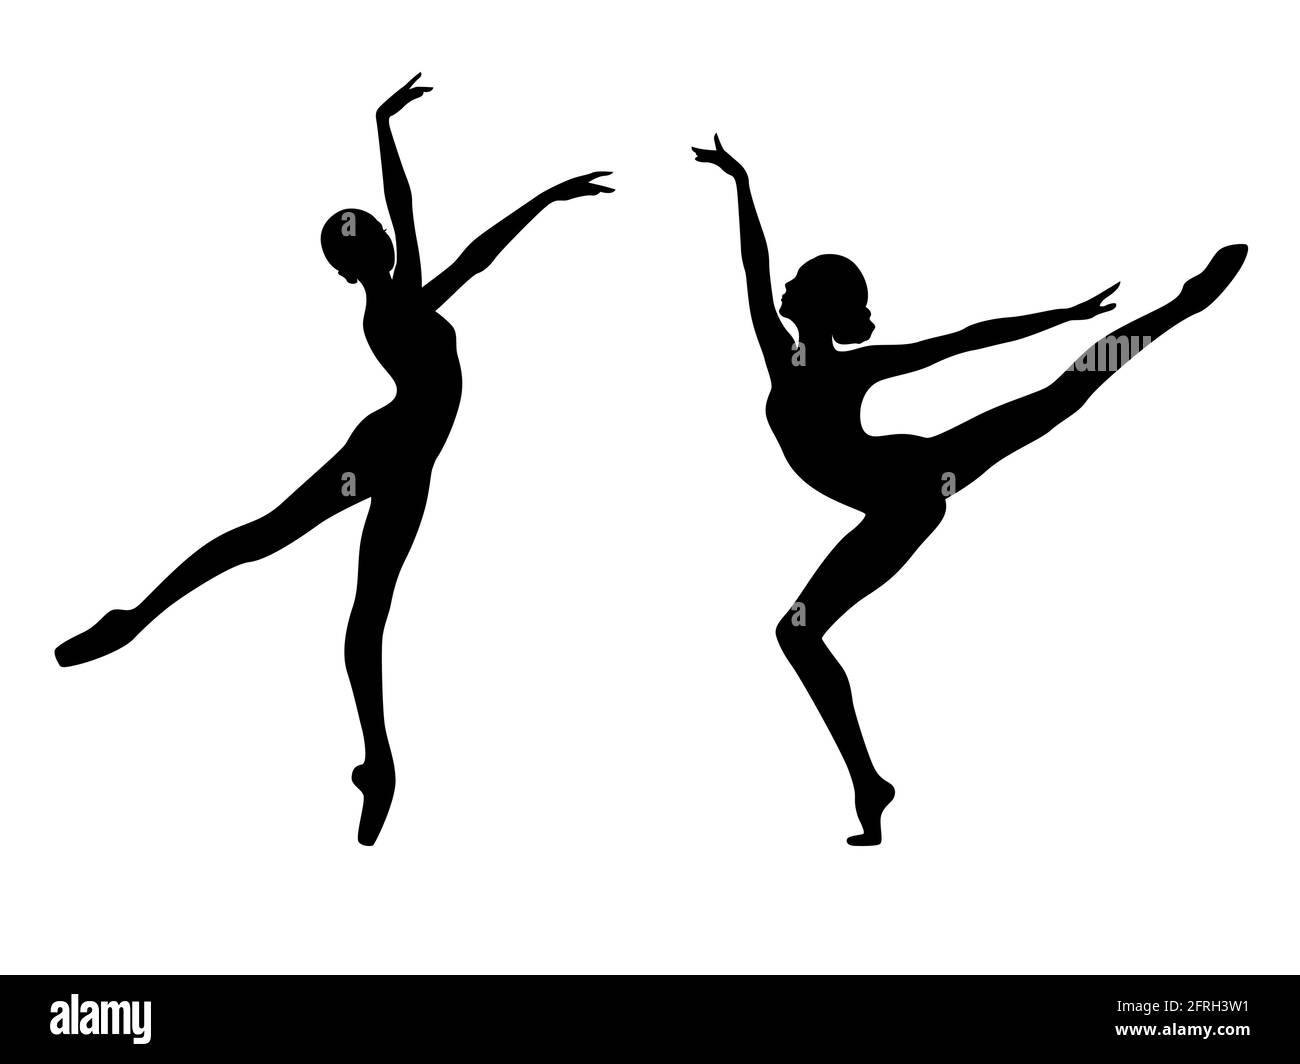 Abstract black stencil silhouettes of slender dancer in move, hand drawing vector illustration Stock Vector